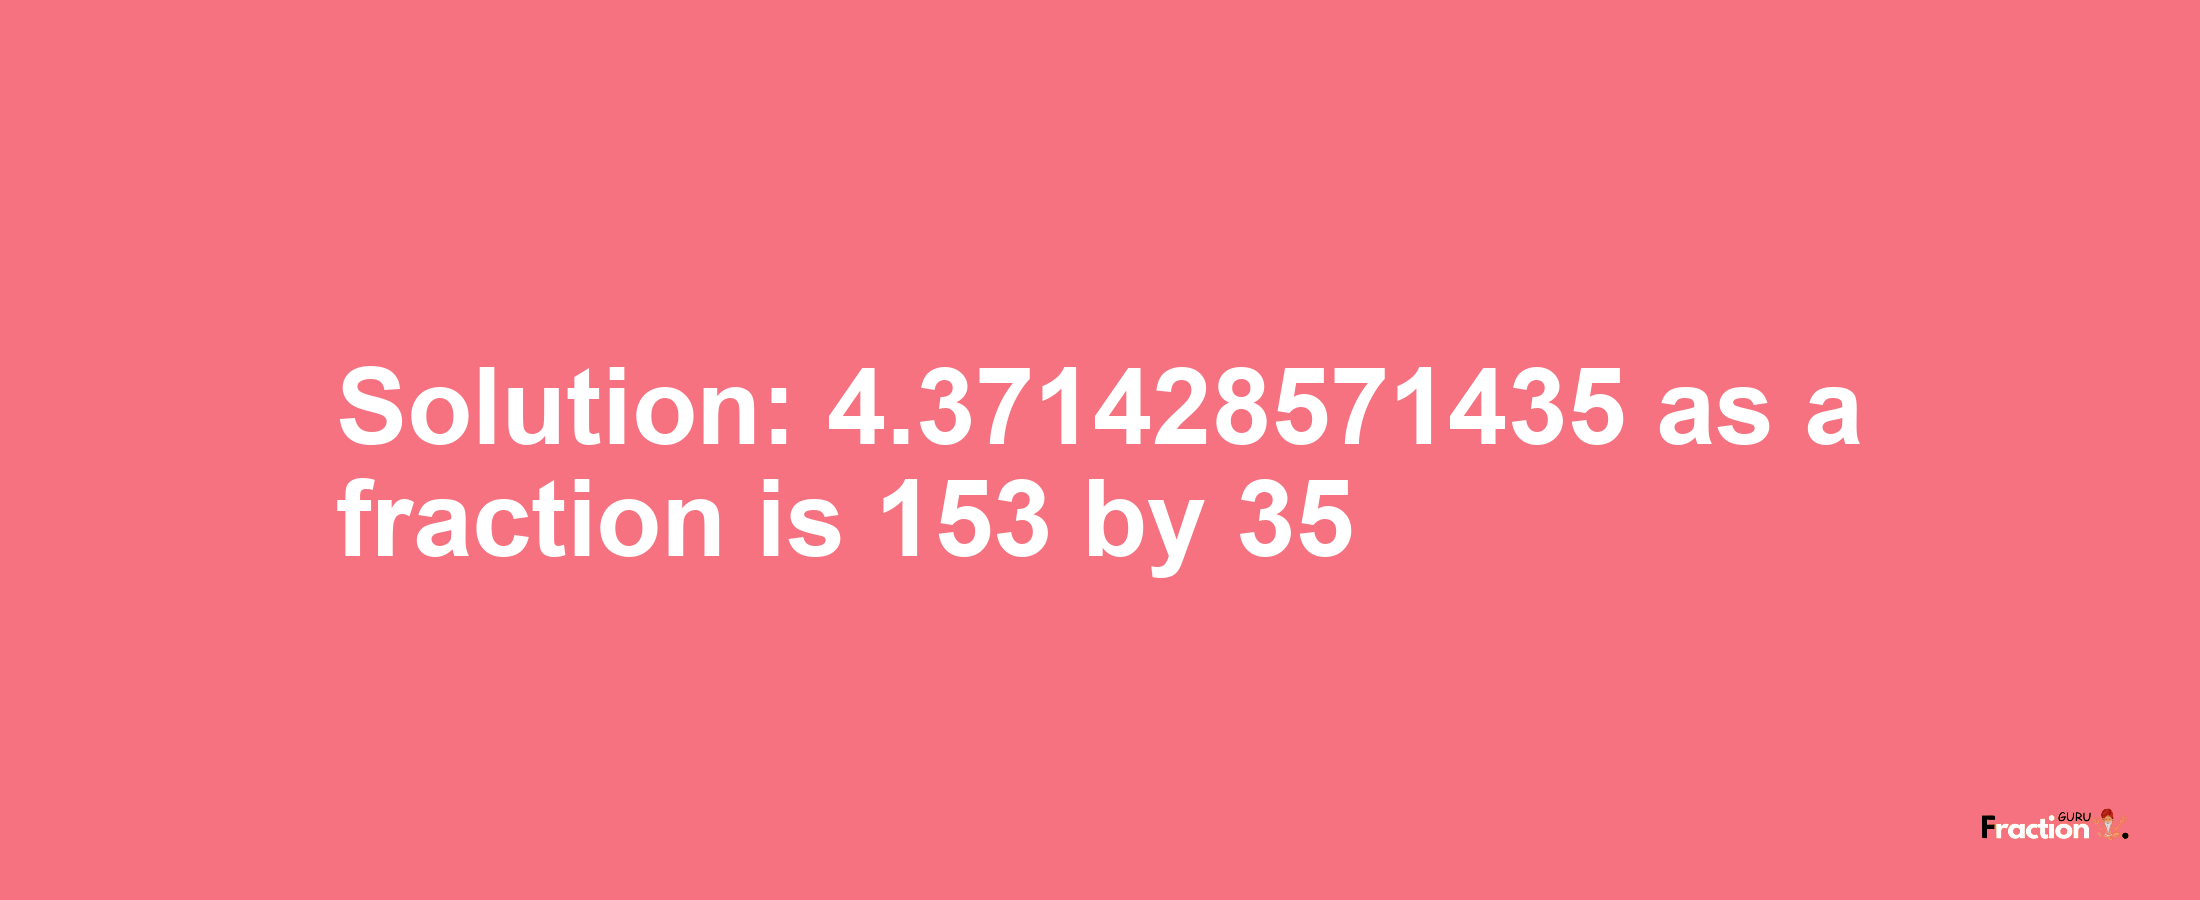 Solution:4.371428571435 as a fraction is 153/35